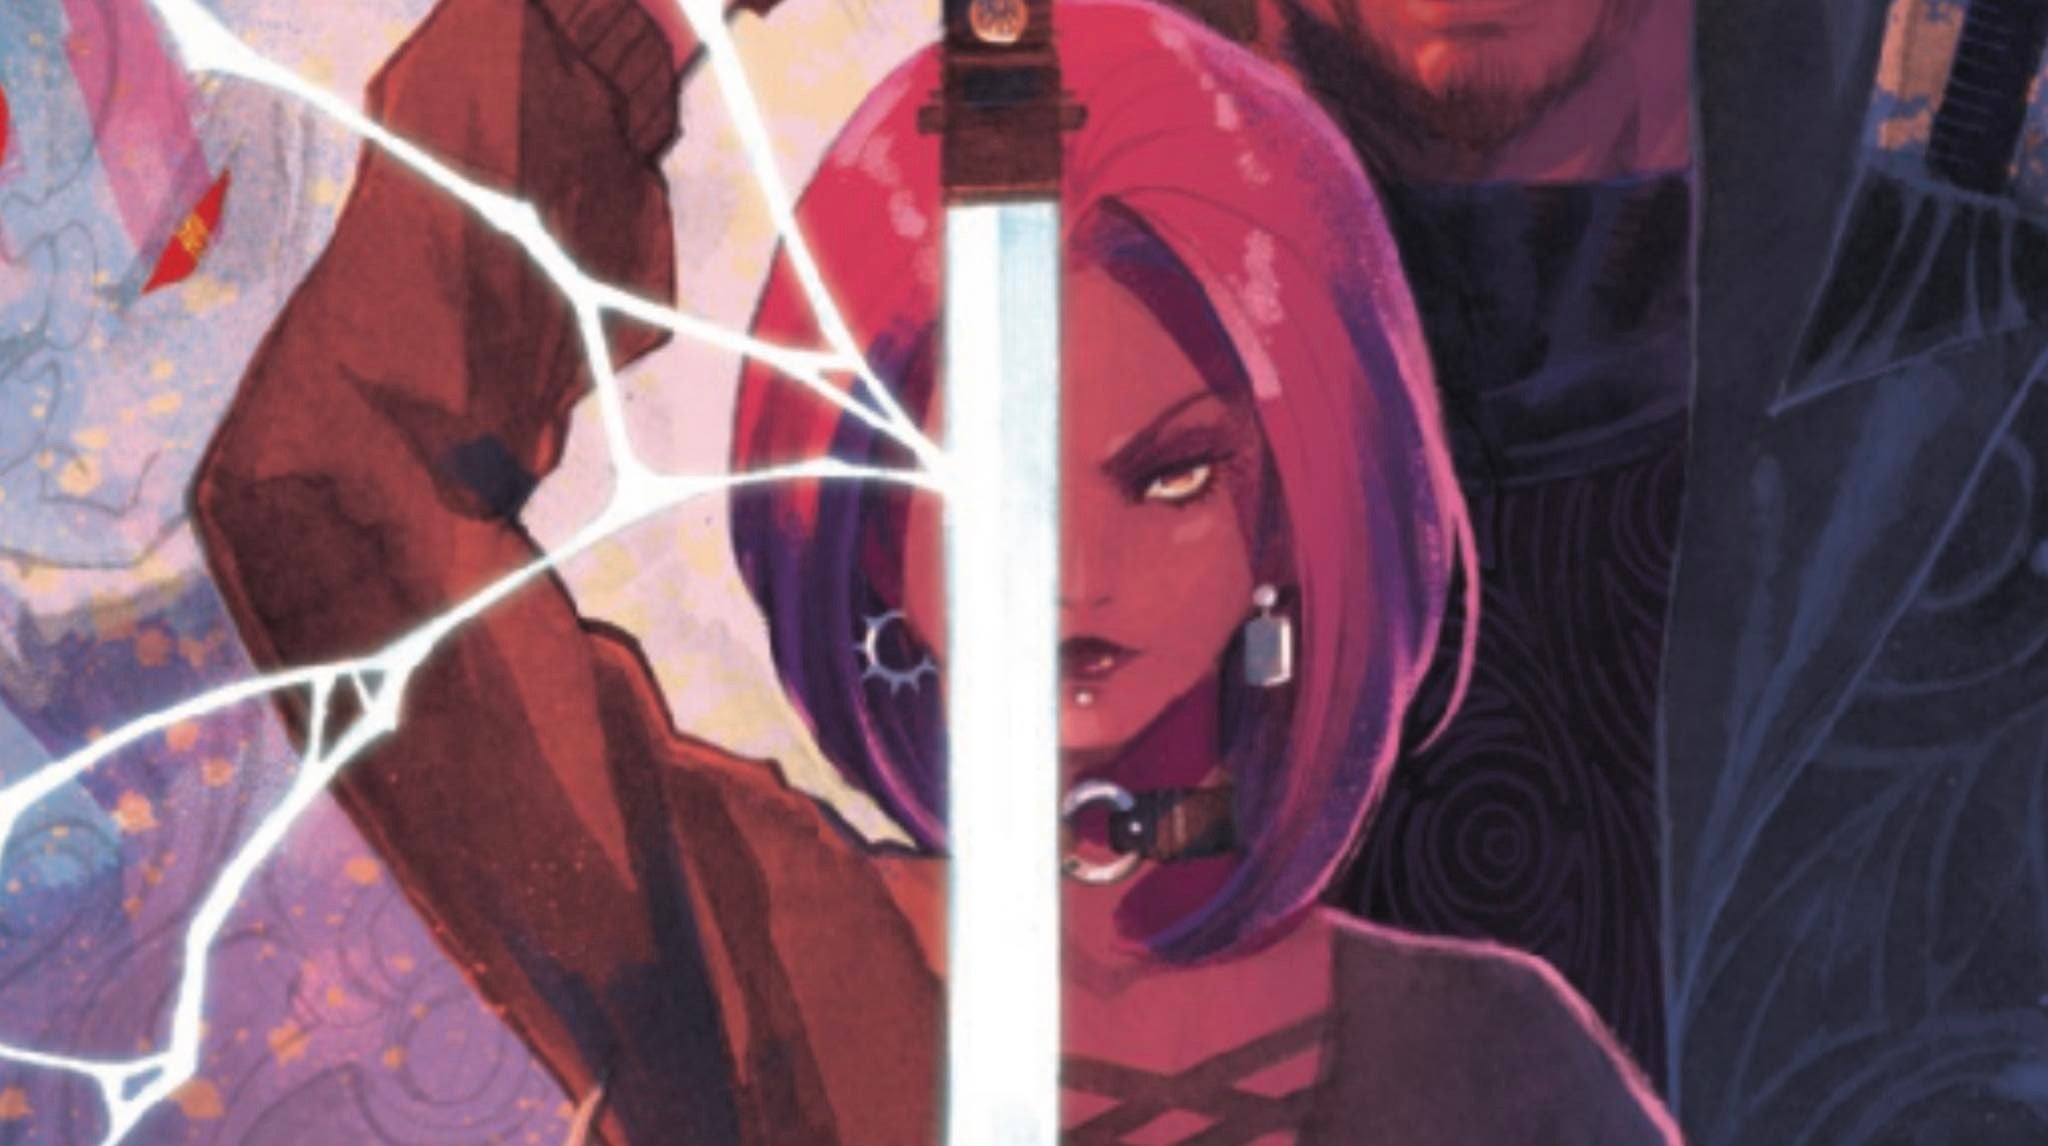 Bloodline: Daughter of Blade #1 cover